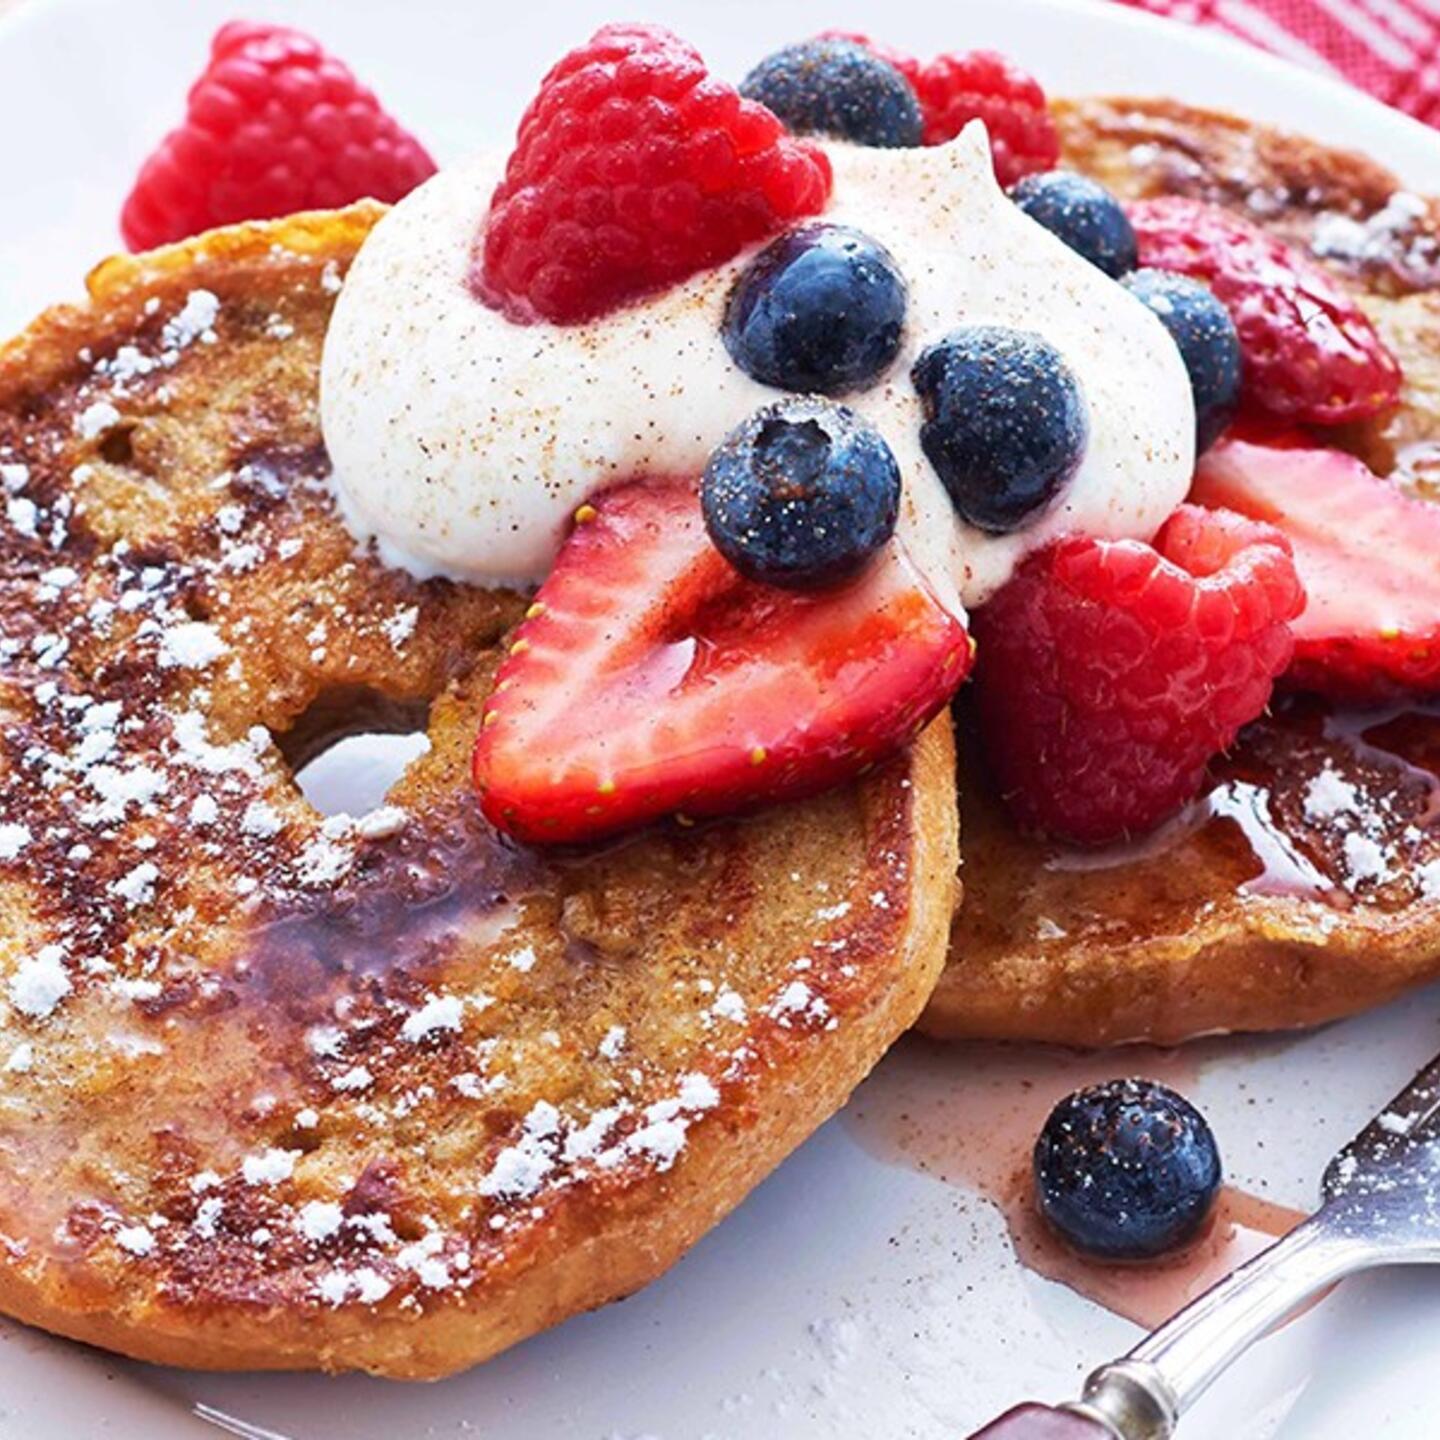 Maple French Toast topped with whipped cream and berries